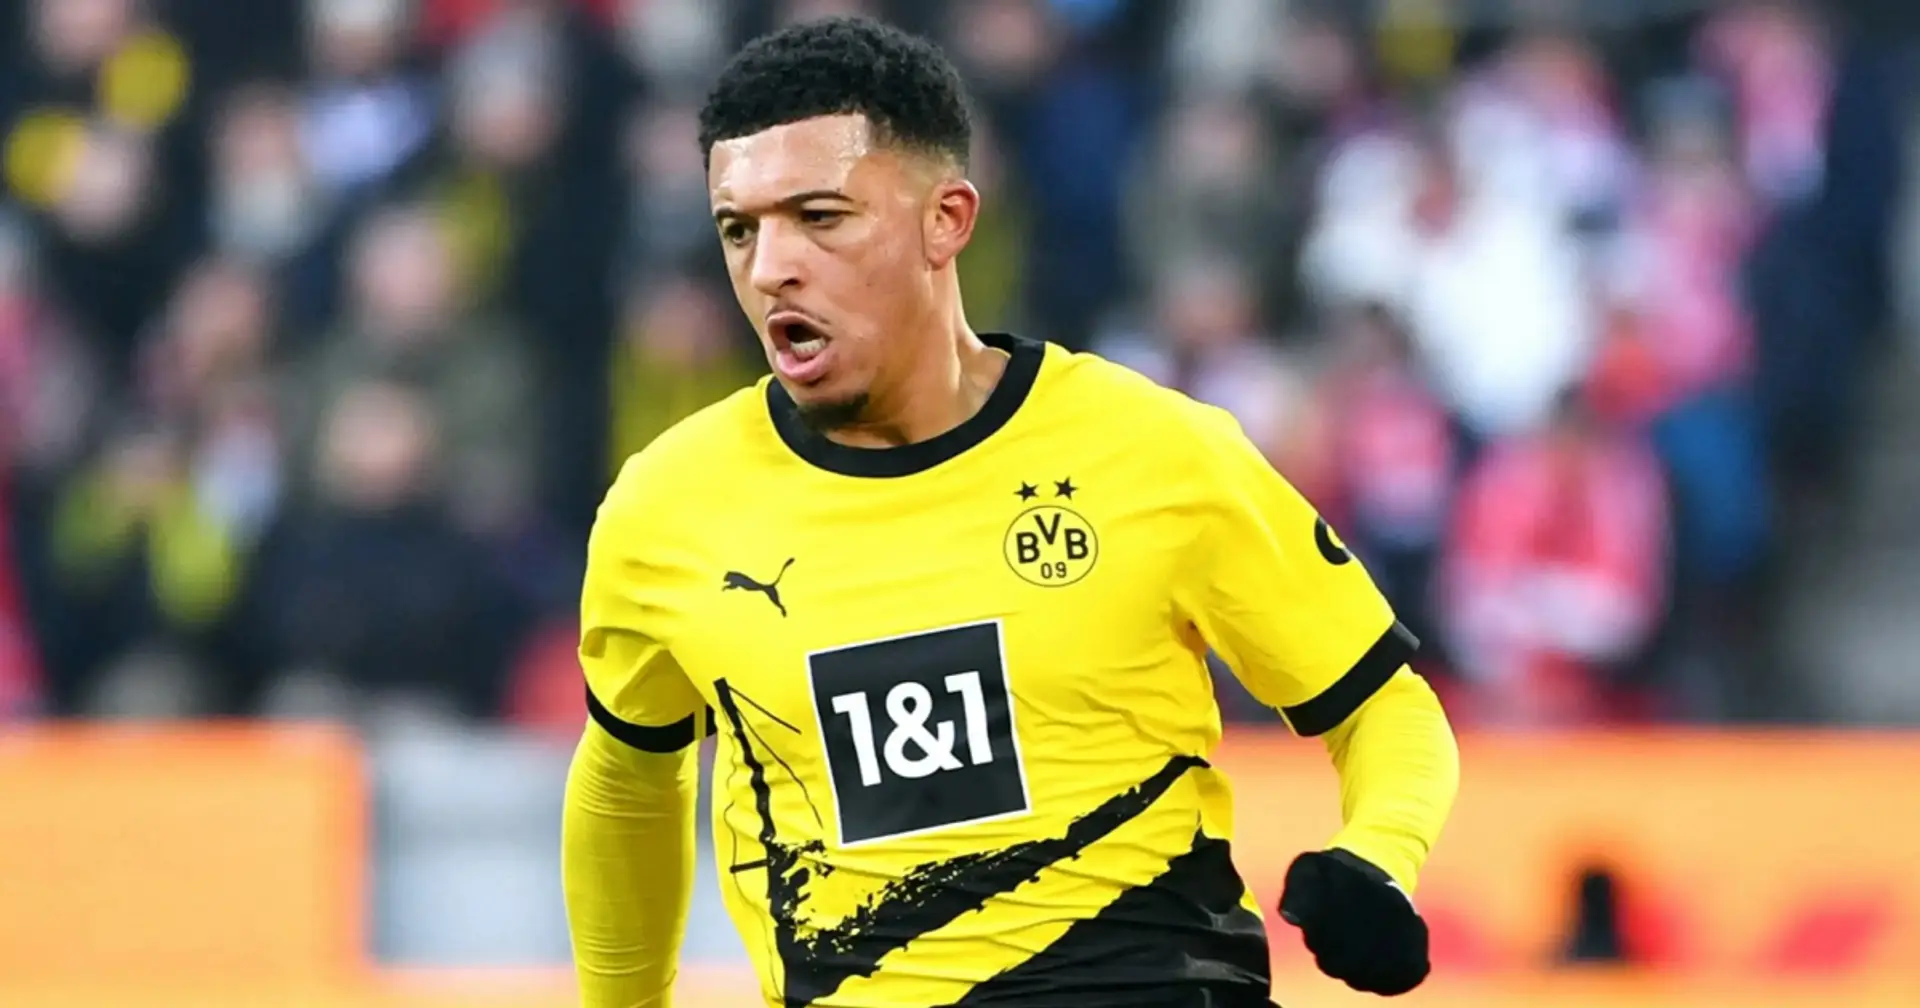 'A mediocre performance in a mediocre team': Man United fans react to Jadon Sancho's start to life at Dortmund